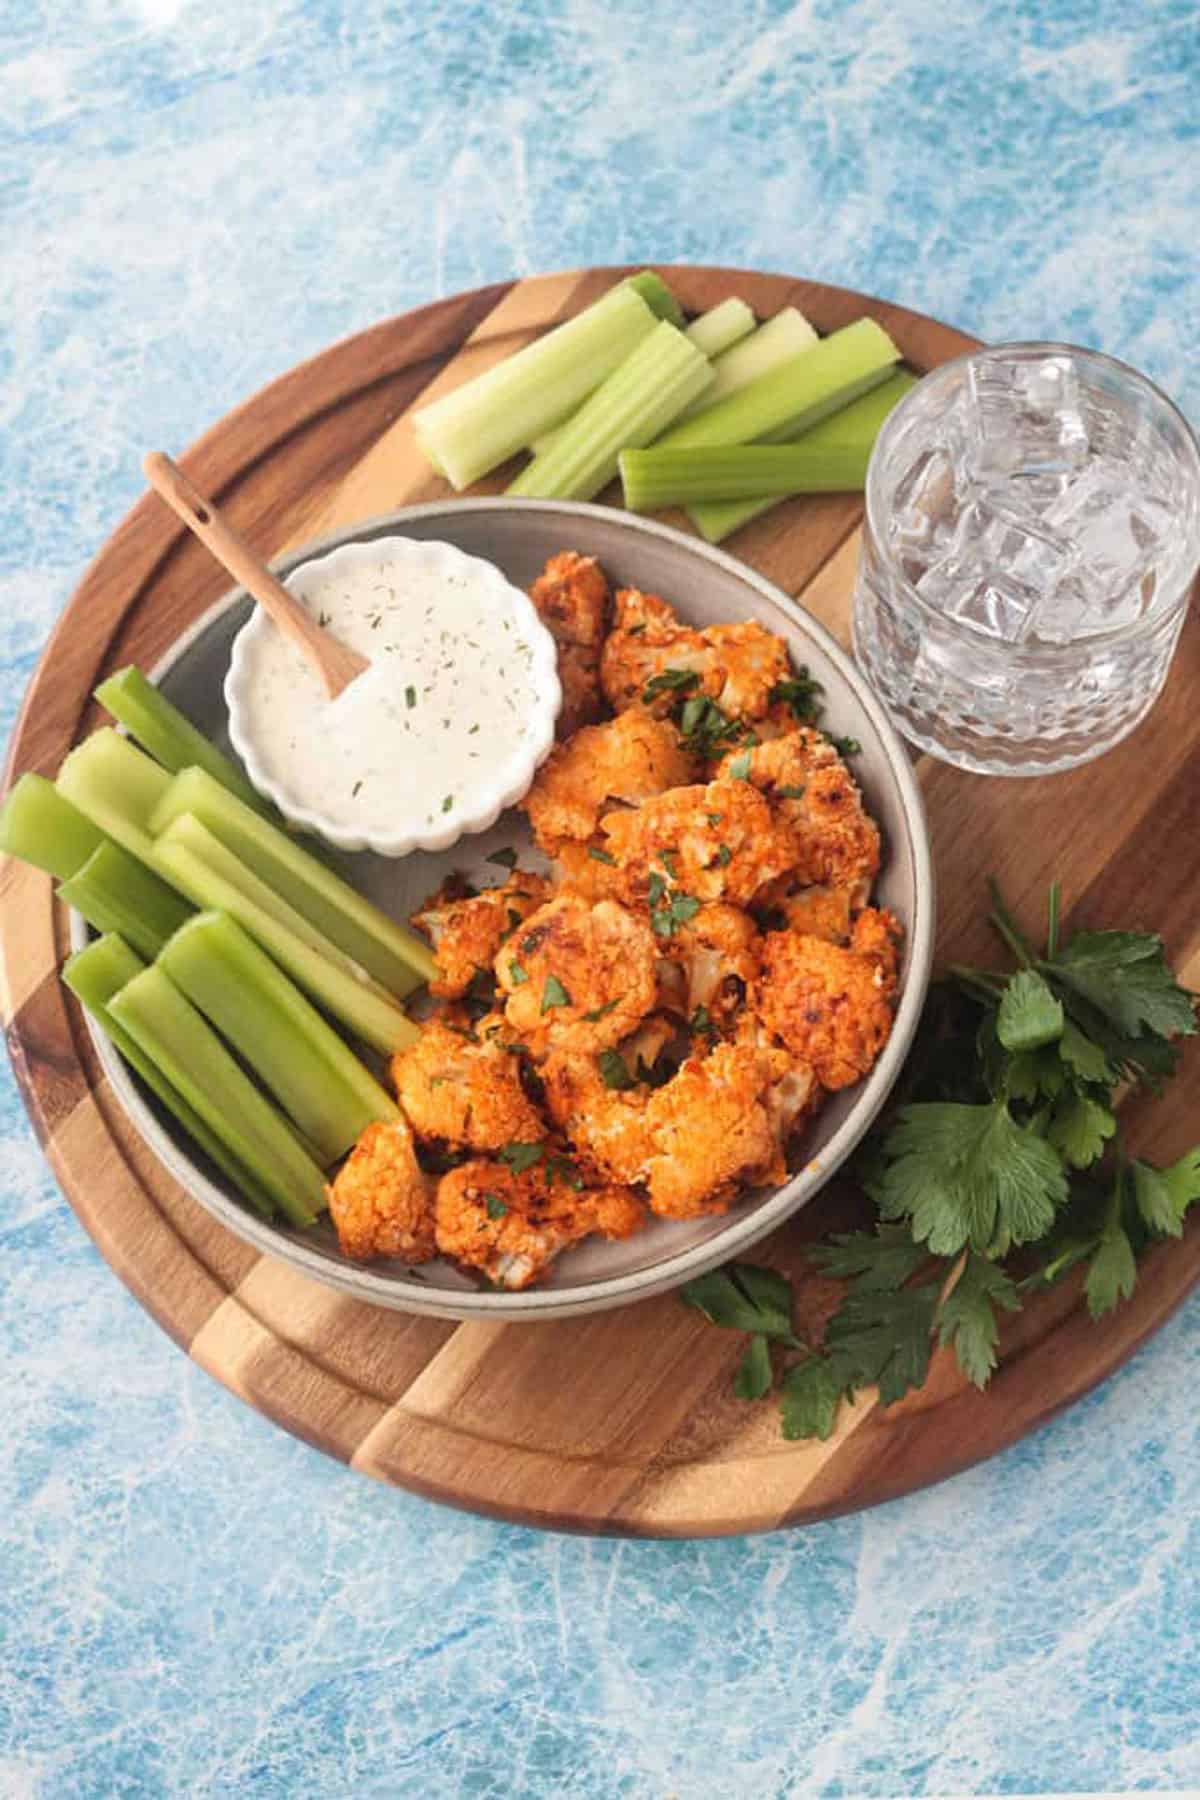 Plate of vegan buffalo cauliflower bites on a plate with celery sticks and small bowl of ranch.